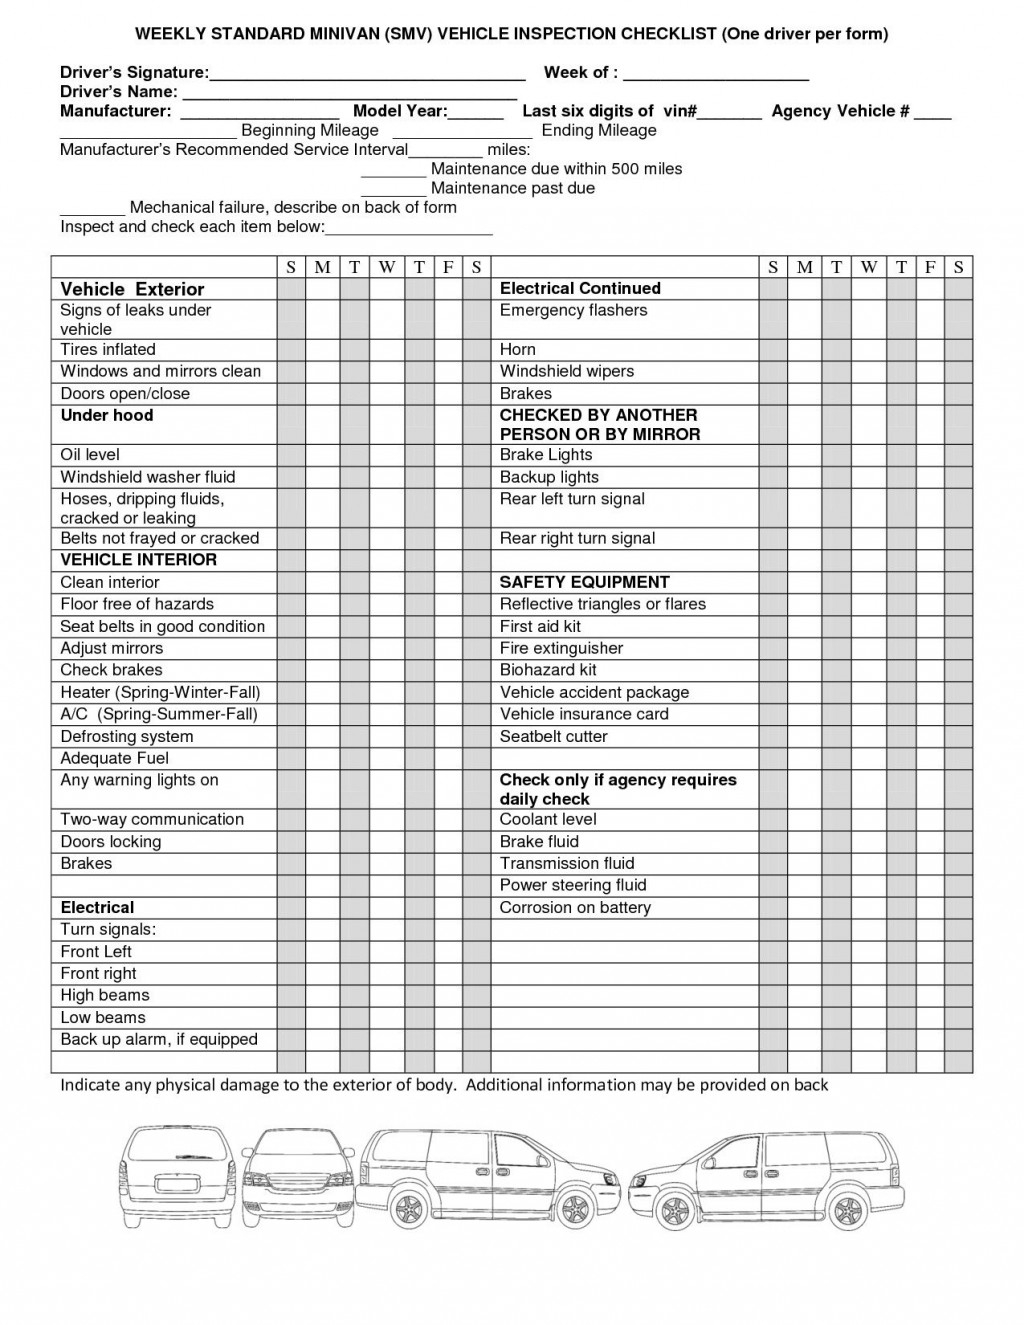 Printable Mto Vehicle Safety Inspection Checklist : Safety  Within Daily Vehicle Maintenance Checklist Template Inside Daily Vehicle Maintenance Checklist Template